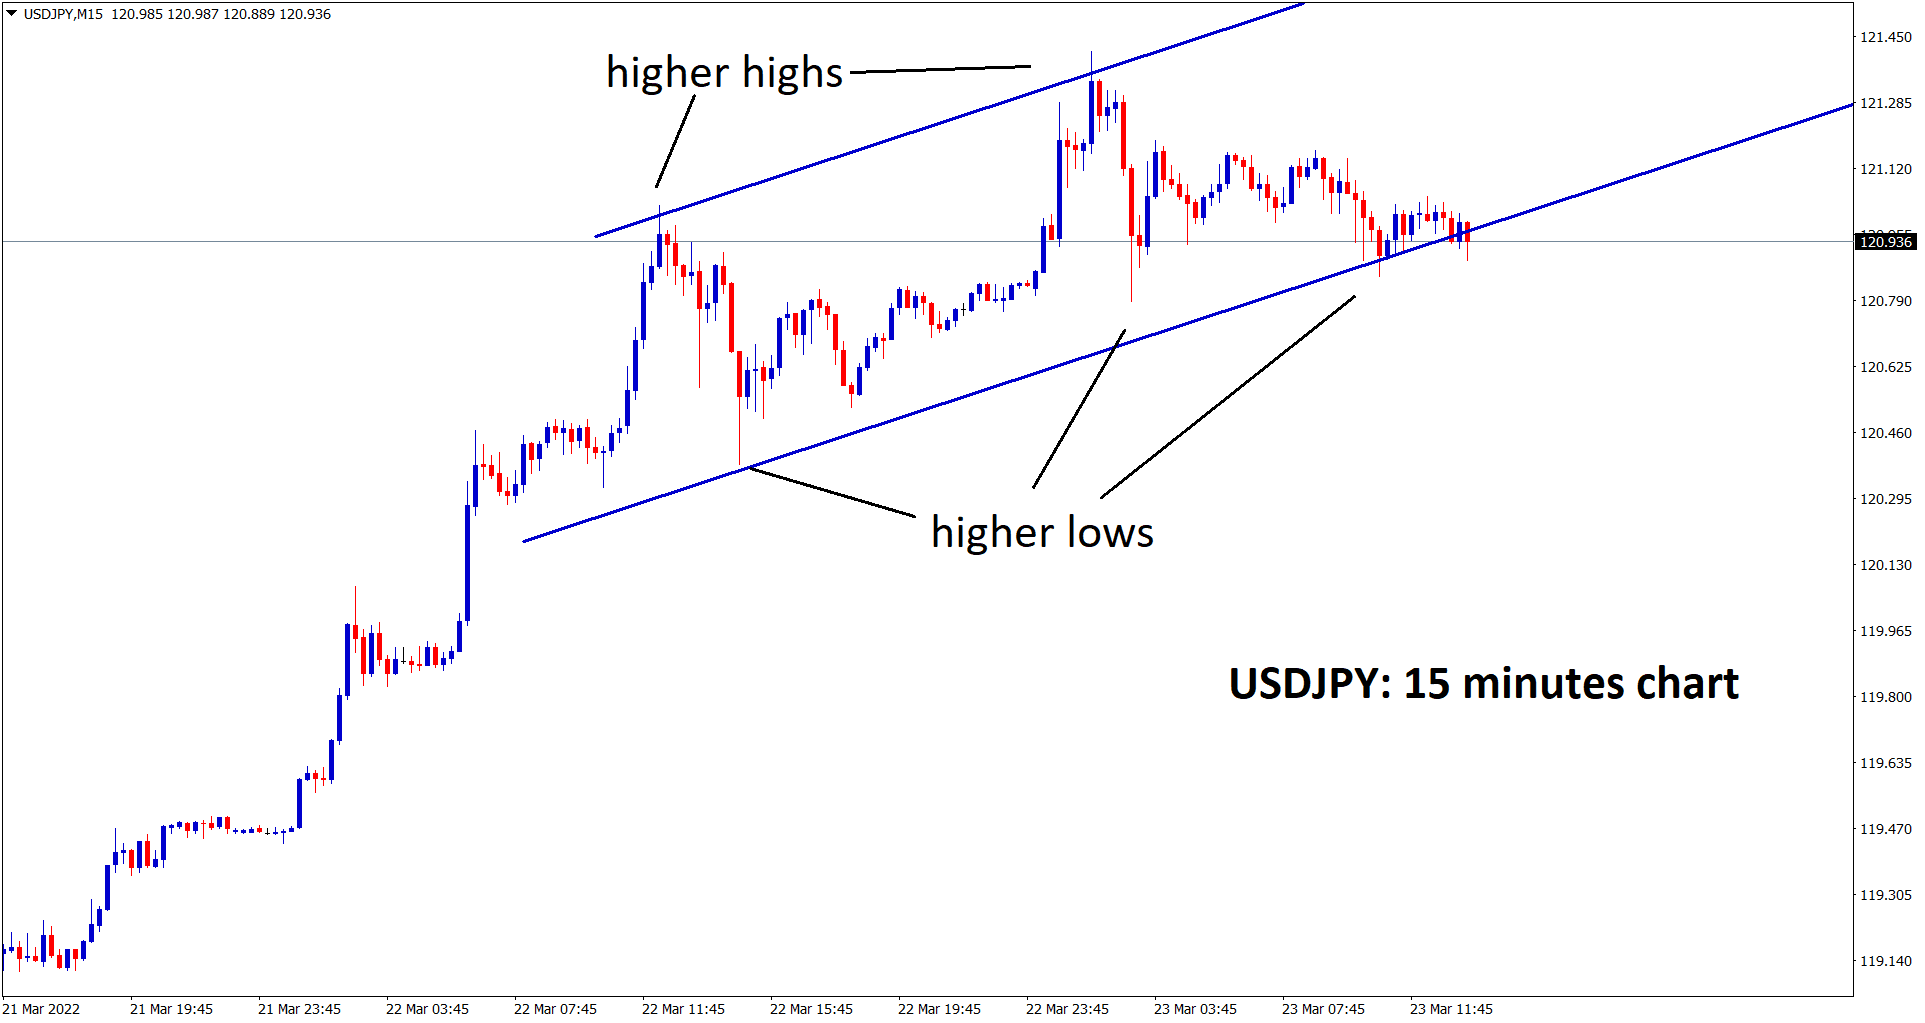 USDJPY is consolidating in the channel range in the 15 minutes timeframe